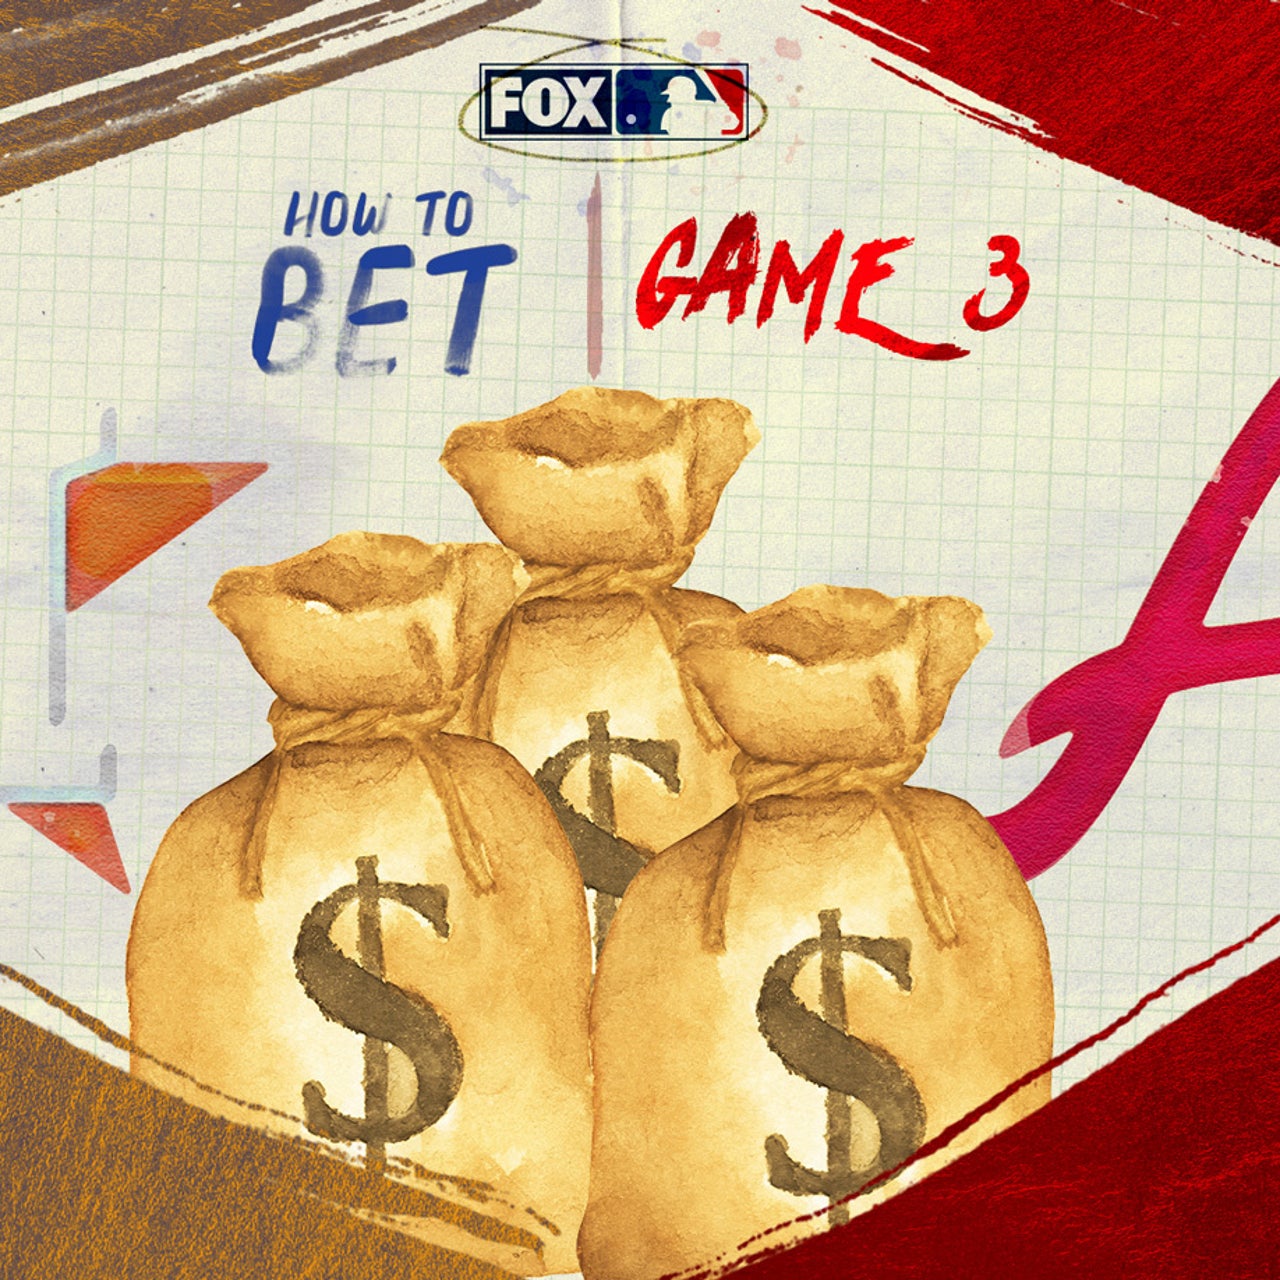 ALCS Game 6: Win $10,000 of Big Papi's money free with FOX Bet Super 6